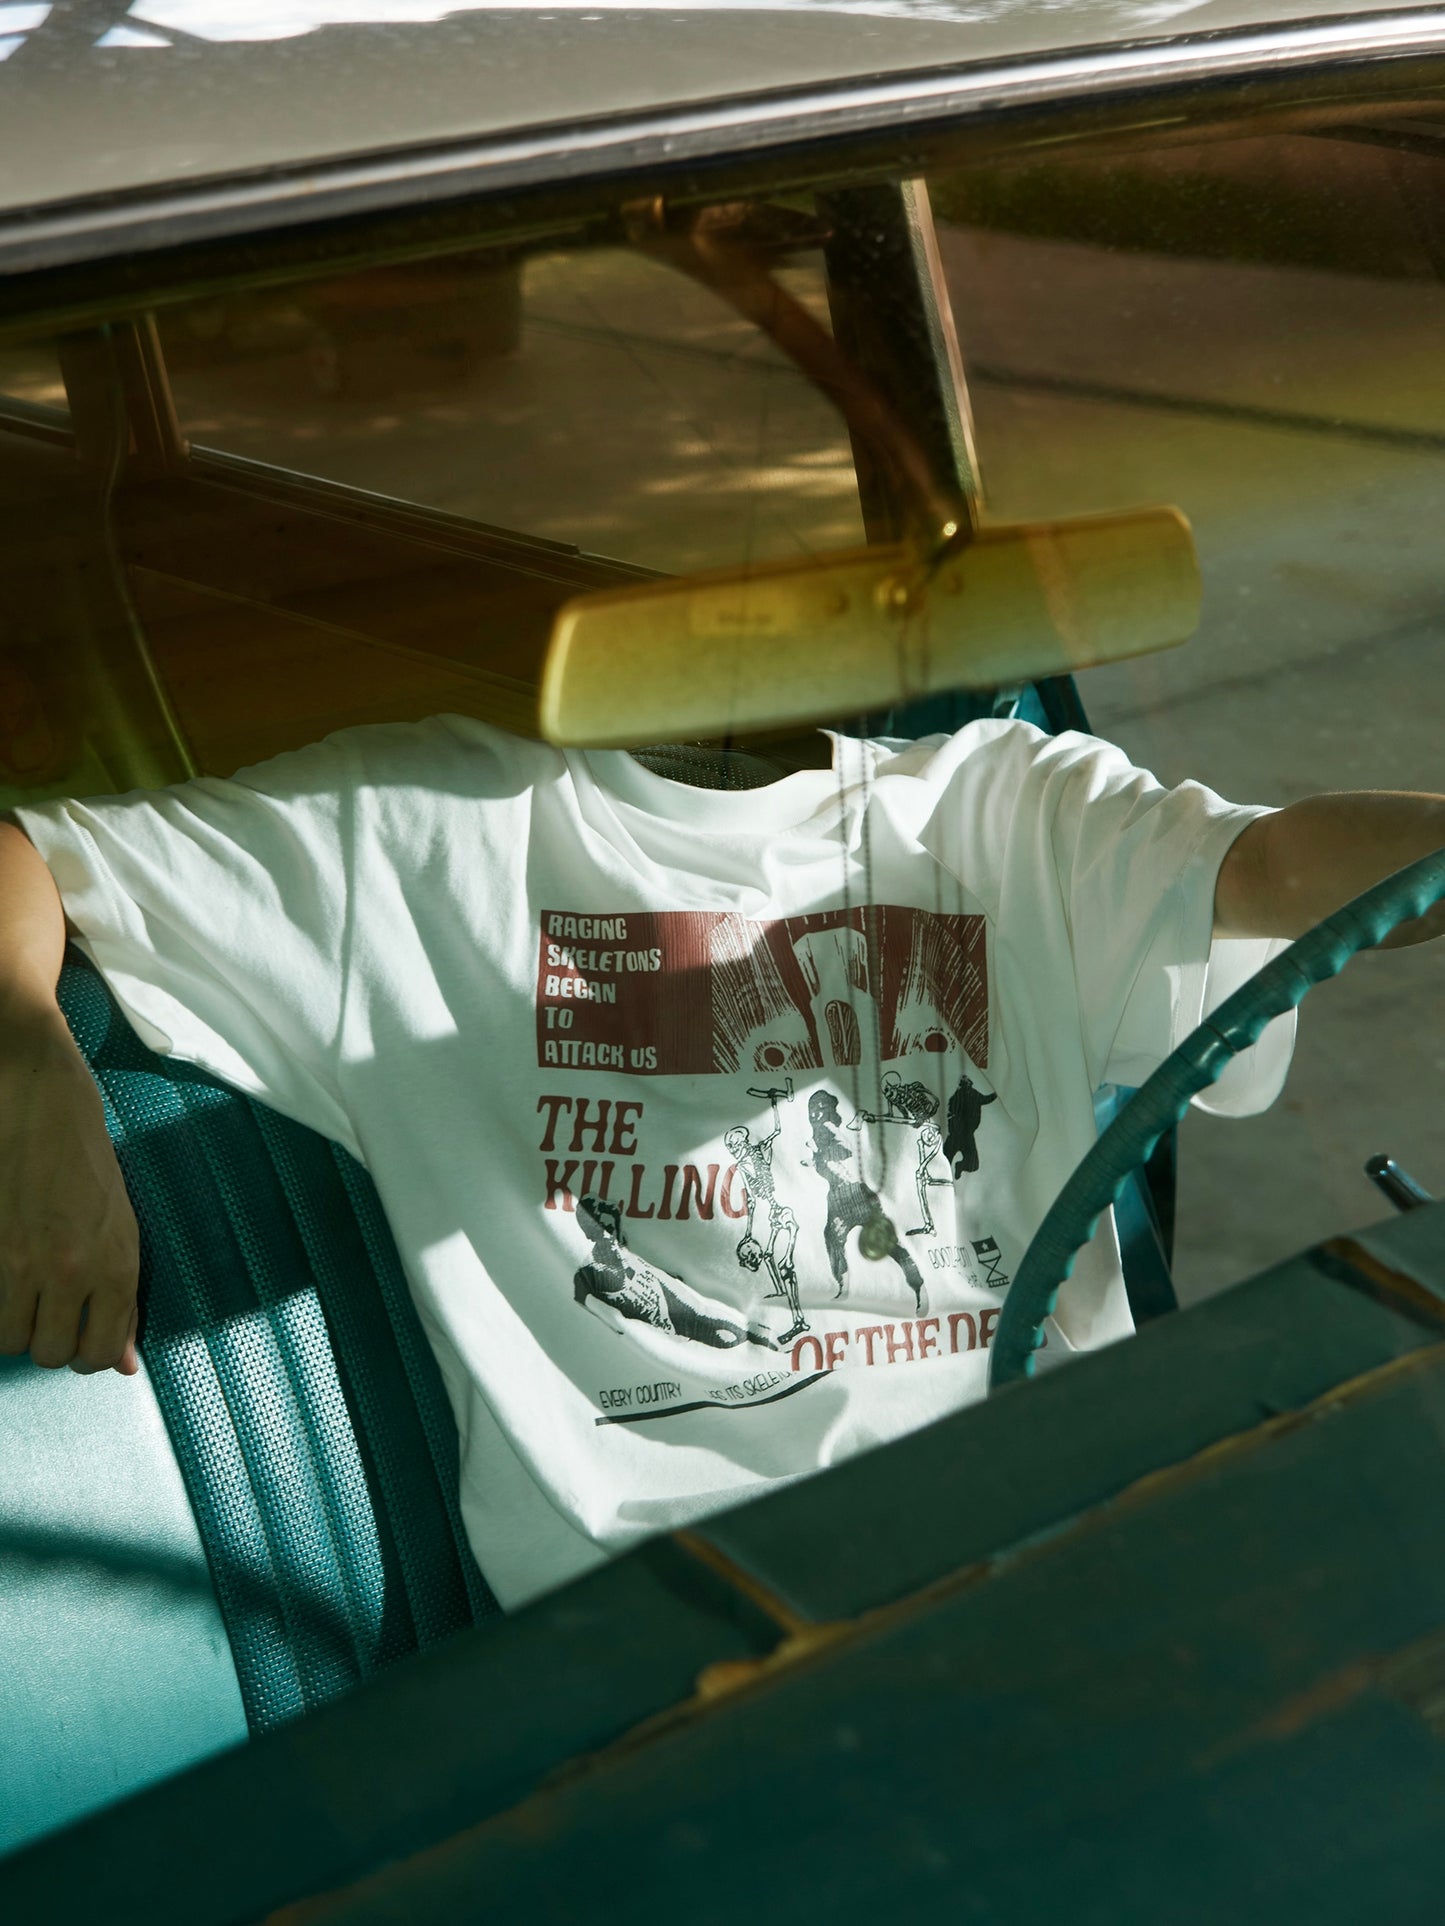 The killing of the dead Tee